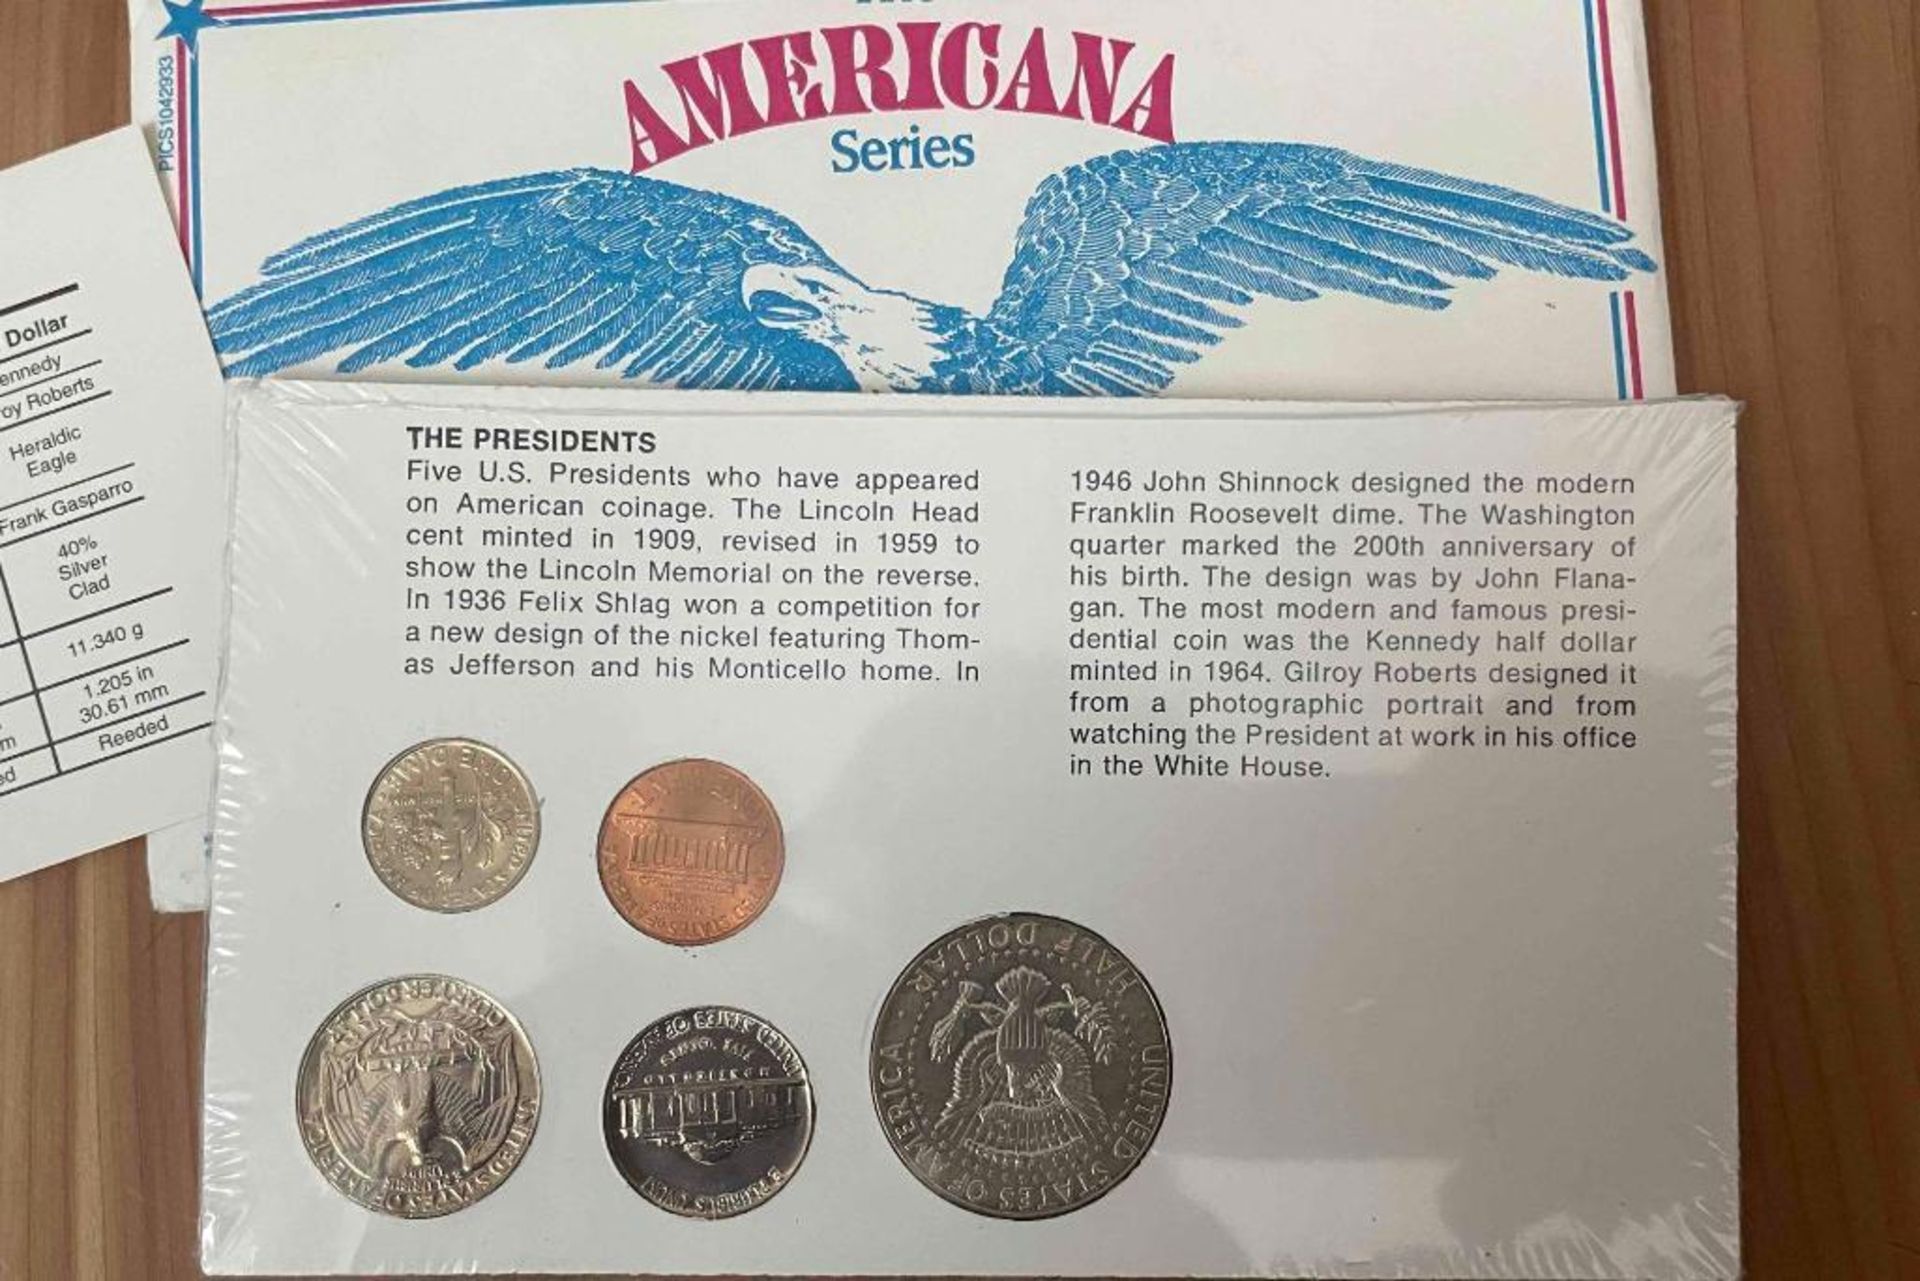 1967 No Mint Mark Collection & The American Series- The Presidents Collection - Image 4 of 6